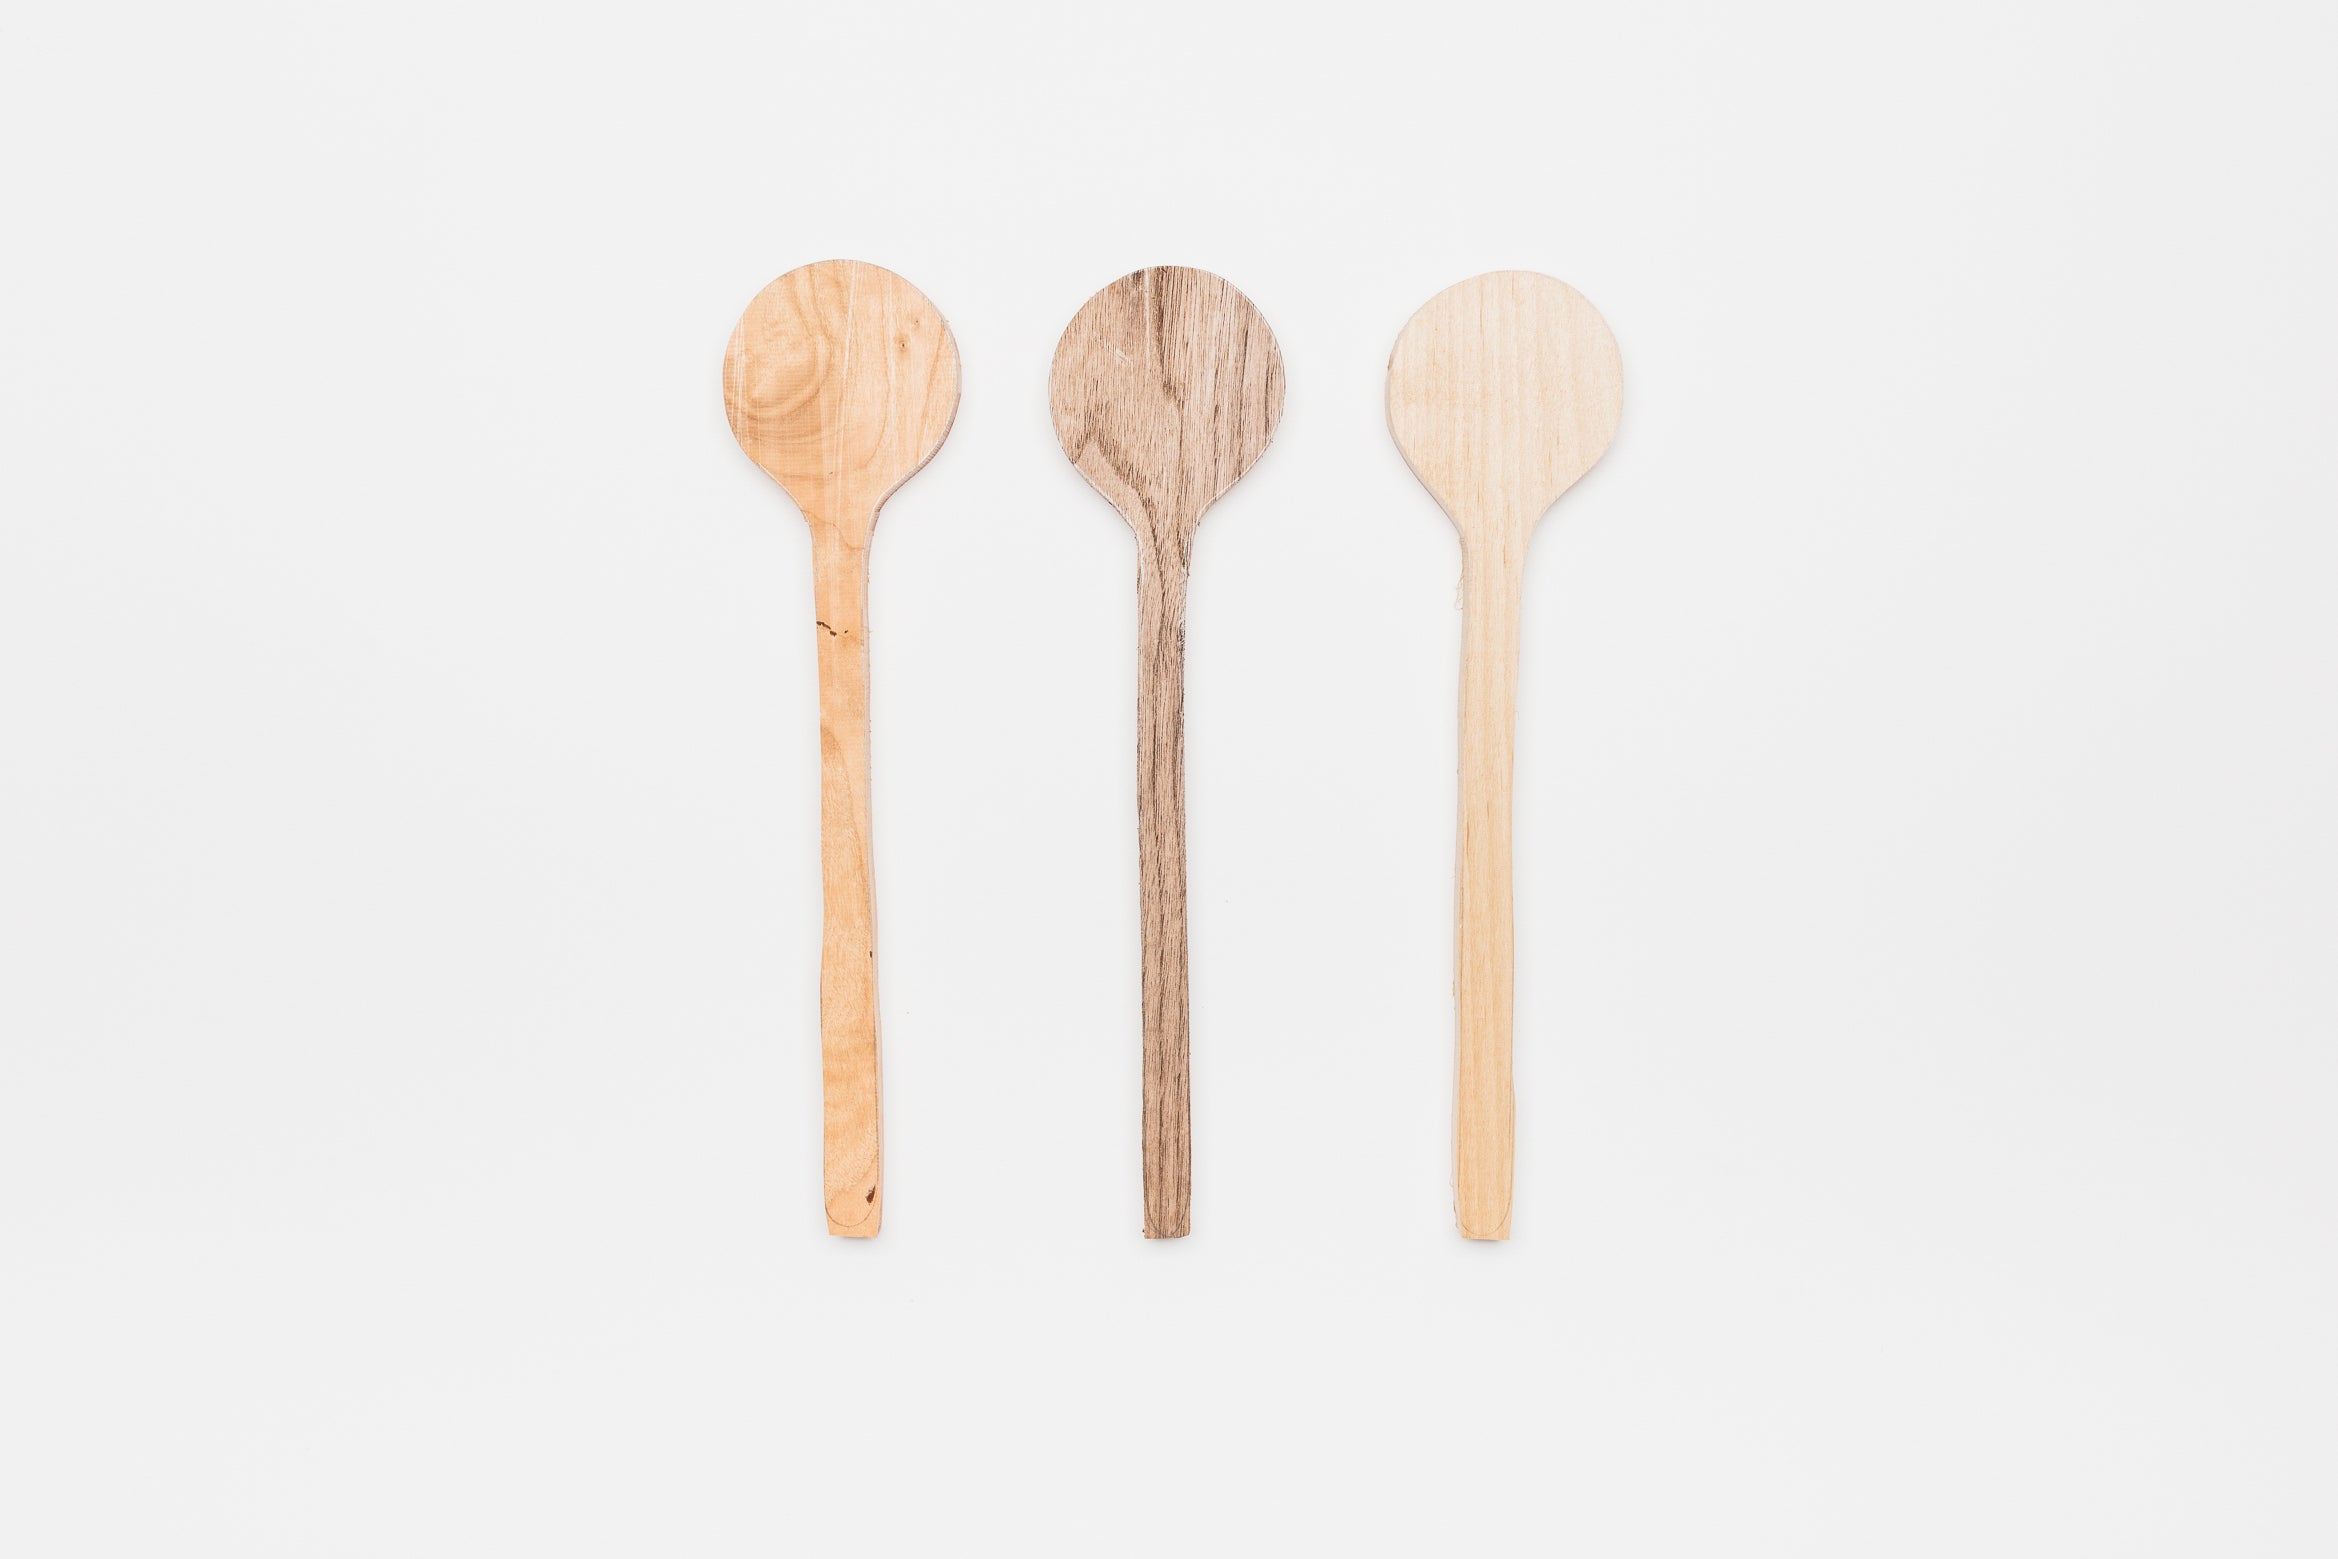 Wooden Spoon Carving Blanks